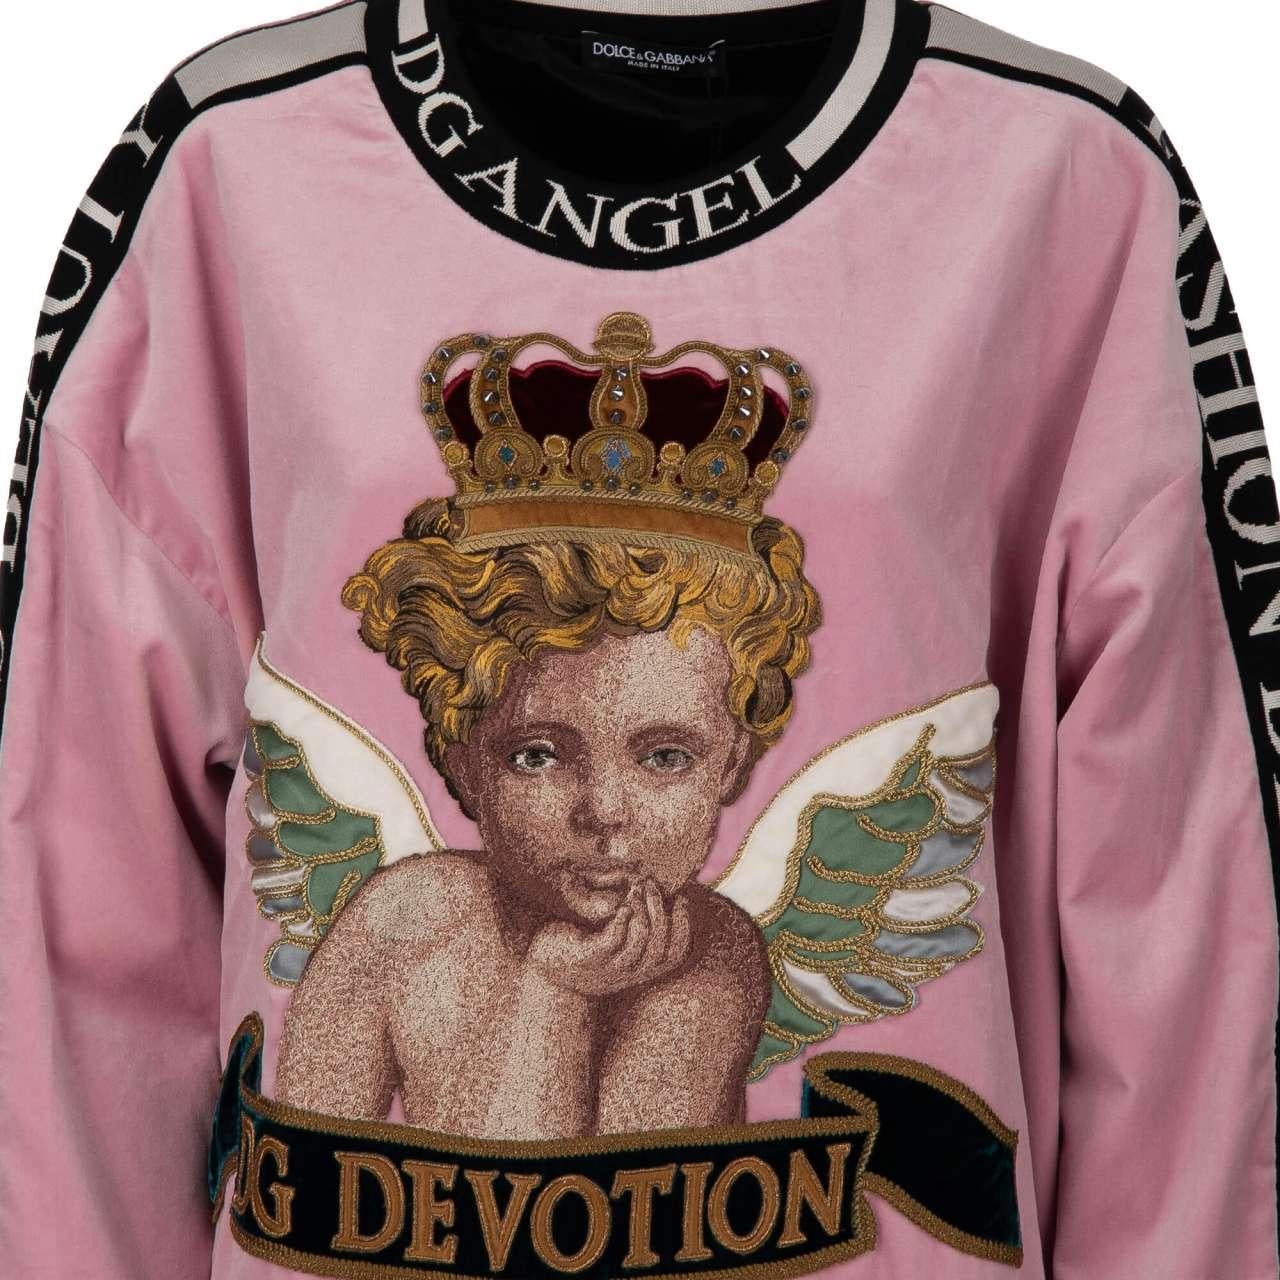 - Oversize long velvet Sweater / Sweatshirt DG DEVOTION with Angel and Crown embroidery by DOLCE & GABBANA - RUNWAY - Dolce & Gabbana Fashion Show - New with Tags - Former RRP: EUR 1.250 - MADE IN ITALY - Oversize, long cut - Model: